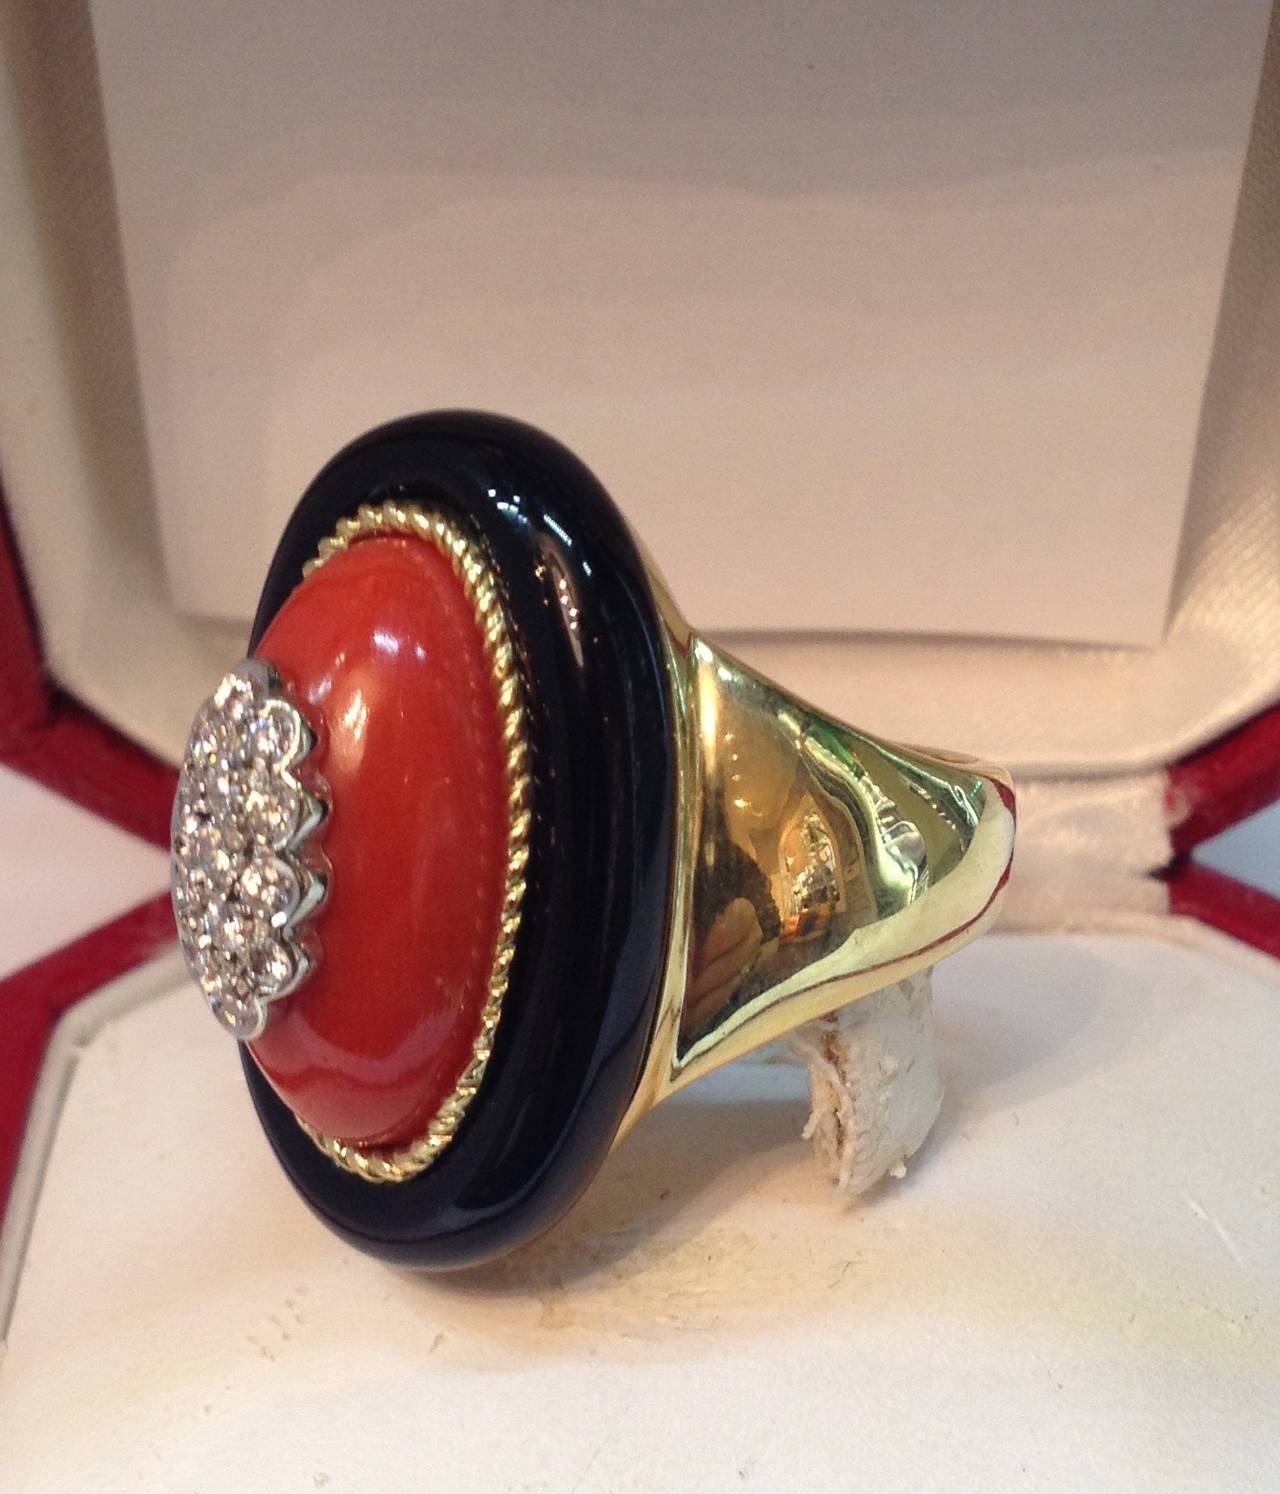 Spritzer & Fuhrmann Oxblood Coral Onyx Gold Cocktail Ring 5